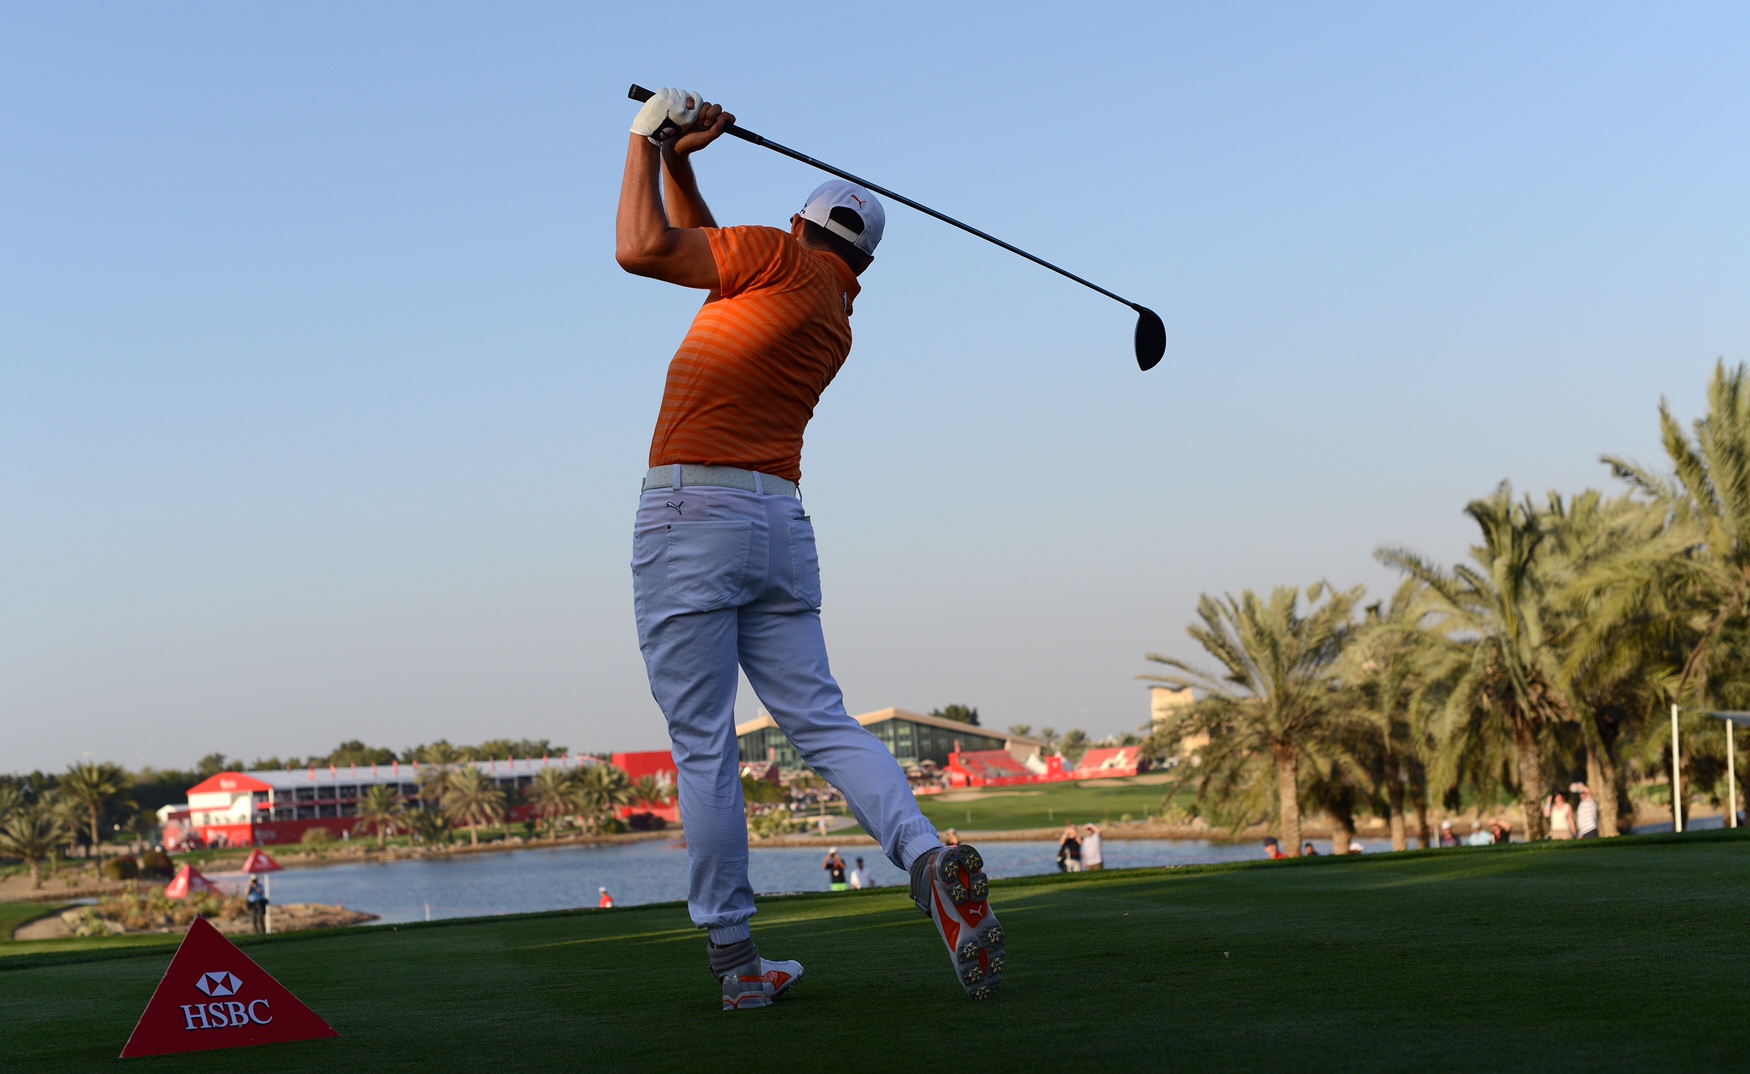 Rickie Fowler of the United States tees off at the 18th hole during the Abu Dhabi Golf Championship in Abu Dhabi, United Arab Emirates, Sunday, Jan. 24, 2016. (AP Photo/Martin Dokoupil)